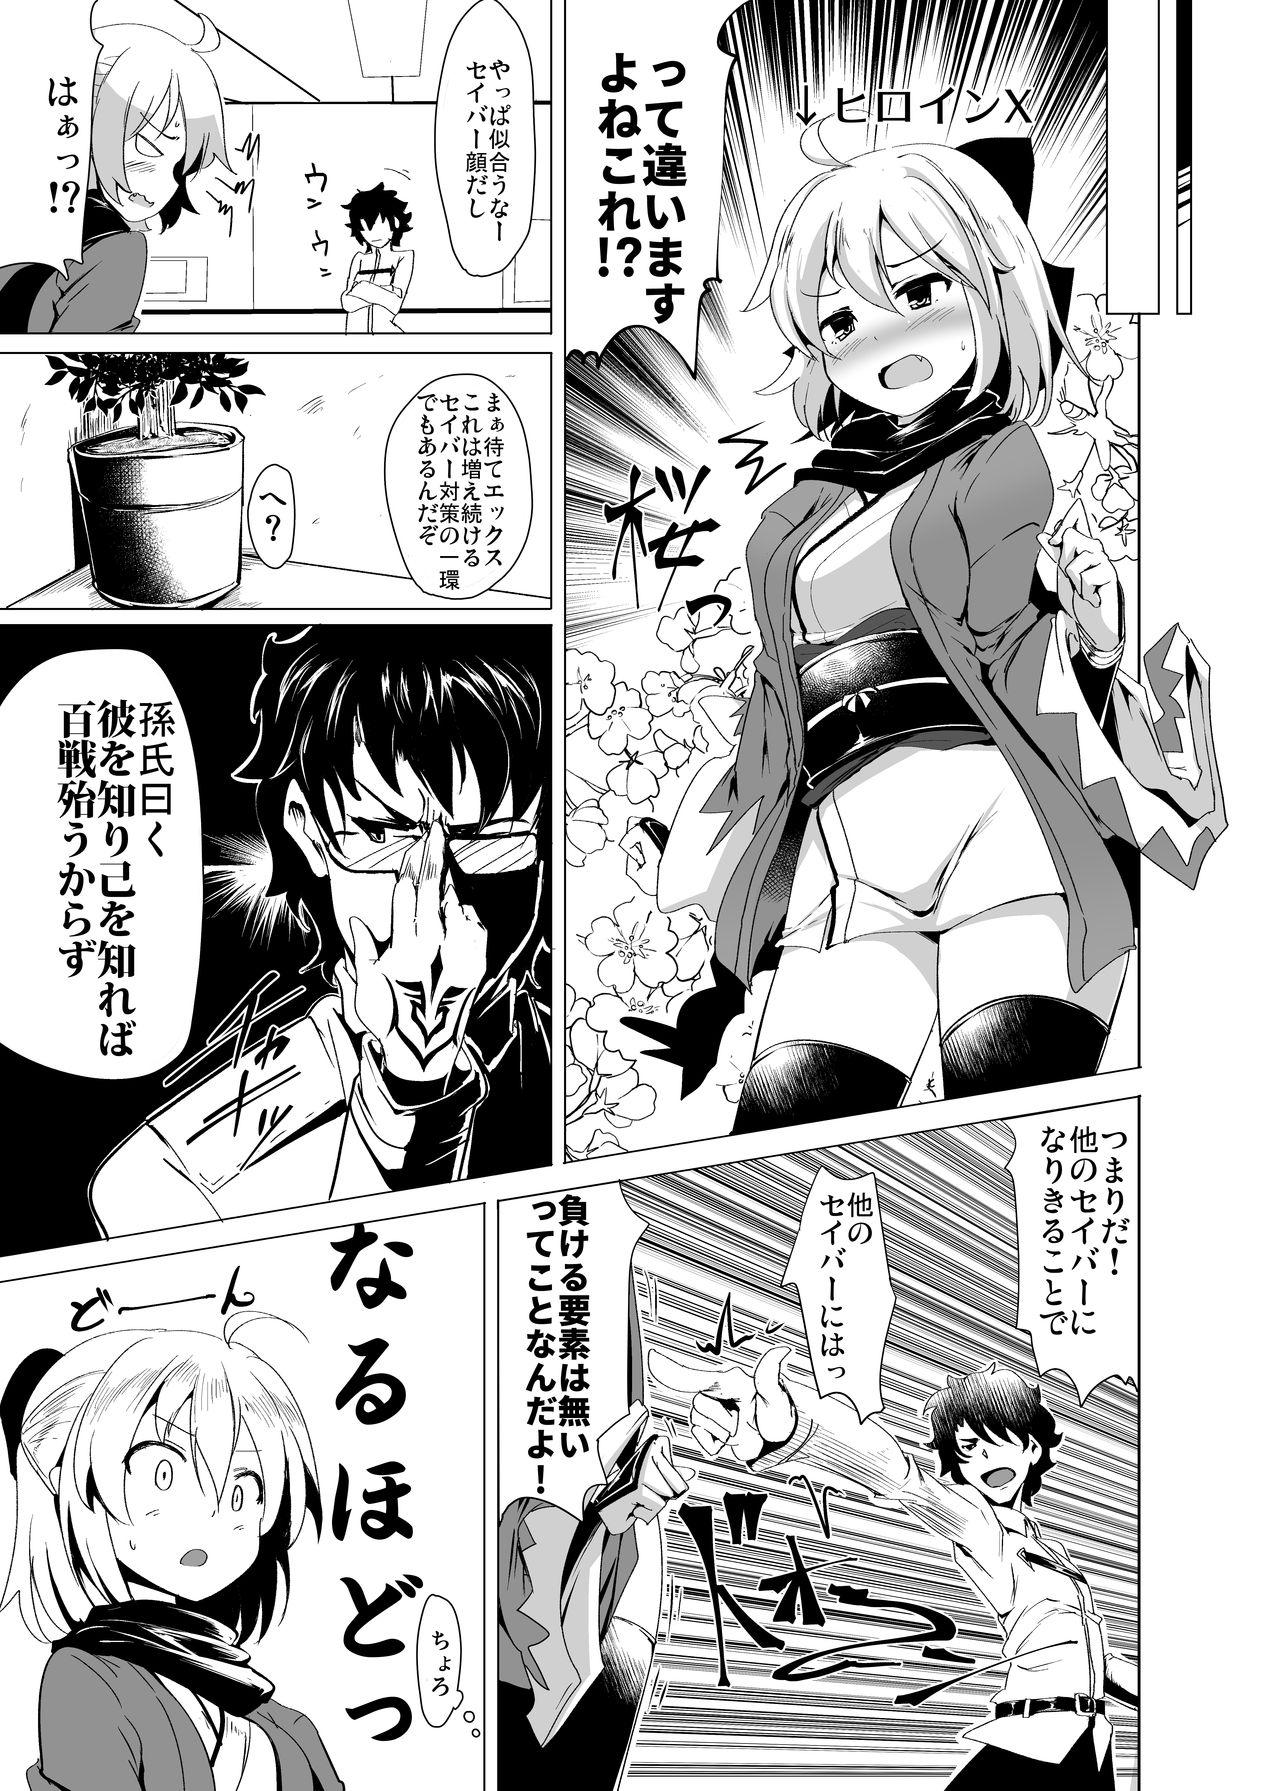 Gangbang Heroine X to Heroine Sex!! - Fate grand order Fitness - Page 8